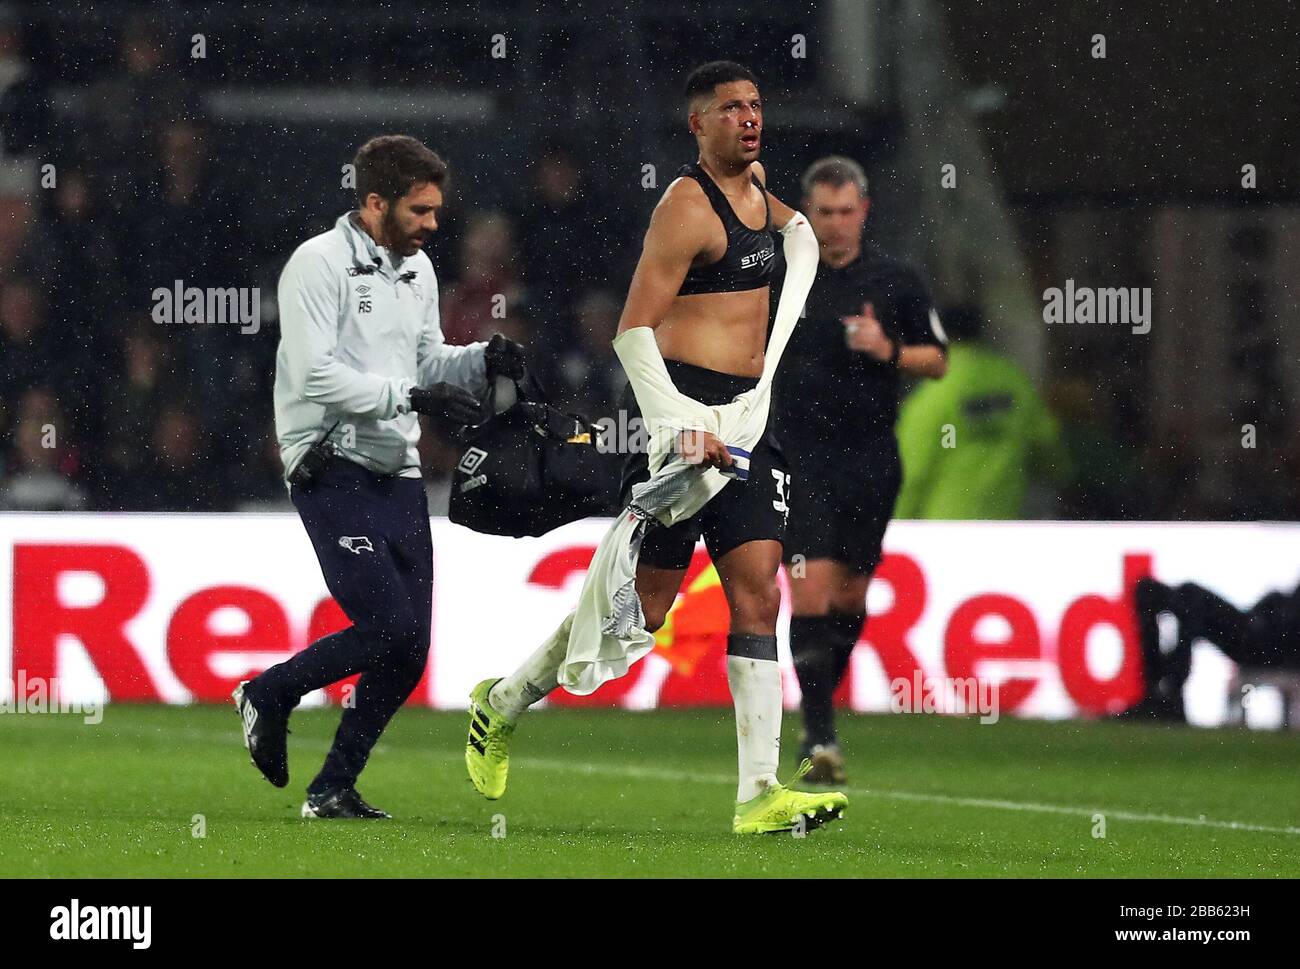 Derby County's Curtis Davies changes his shirt after receiving a kick from Wigan Athletic's Kieffer Moore (not pictured) Stock Photo